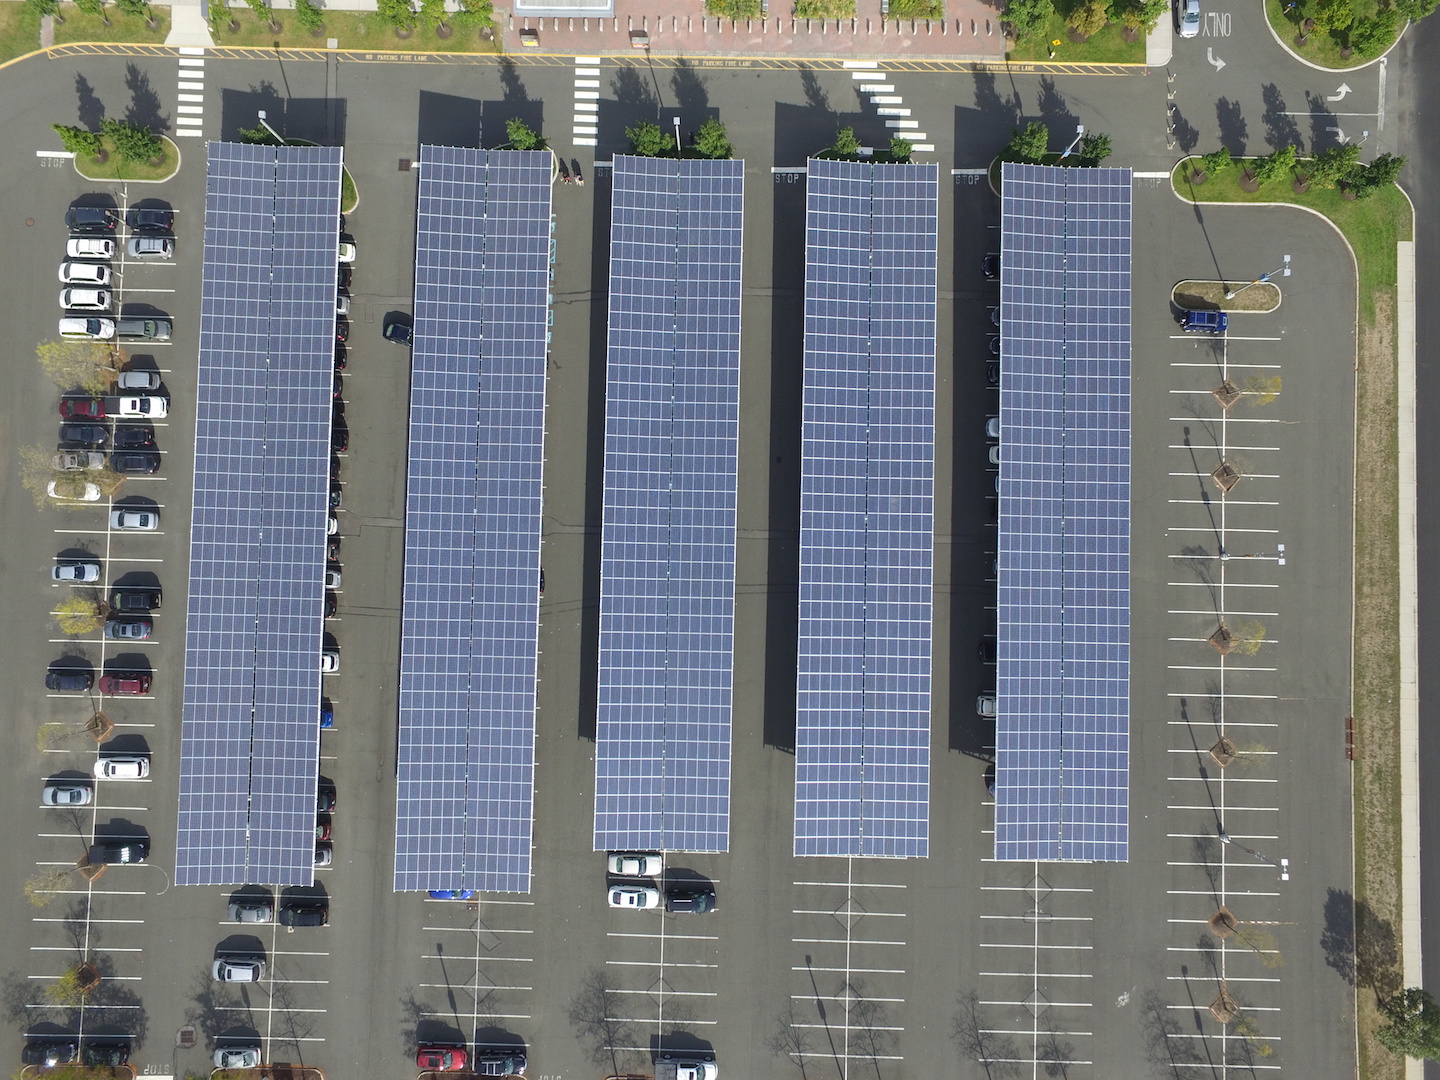 Solar panels in the parking lot